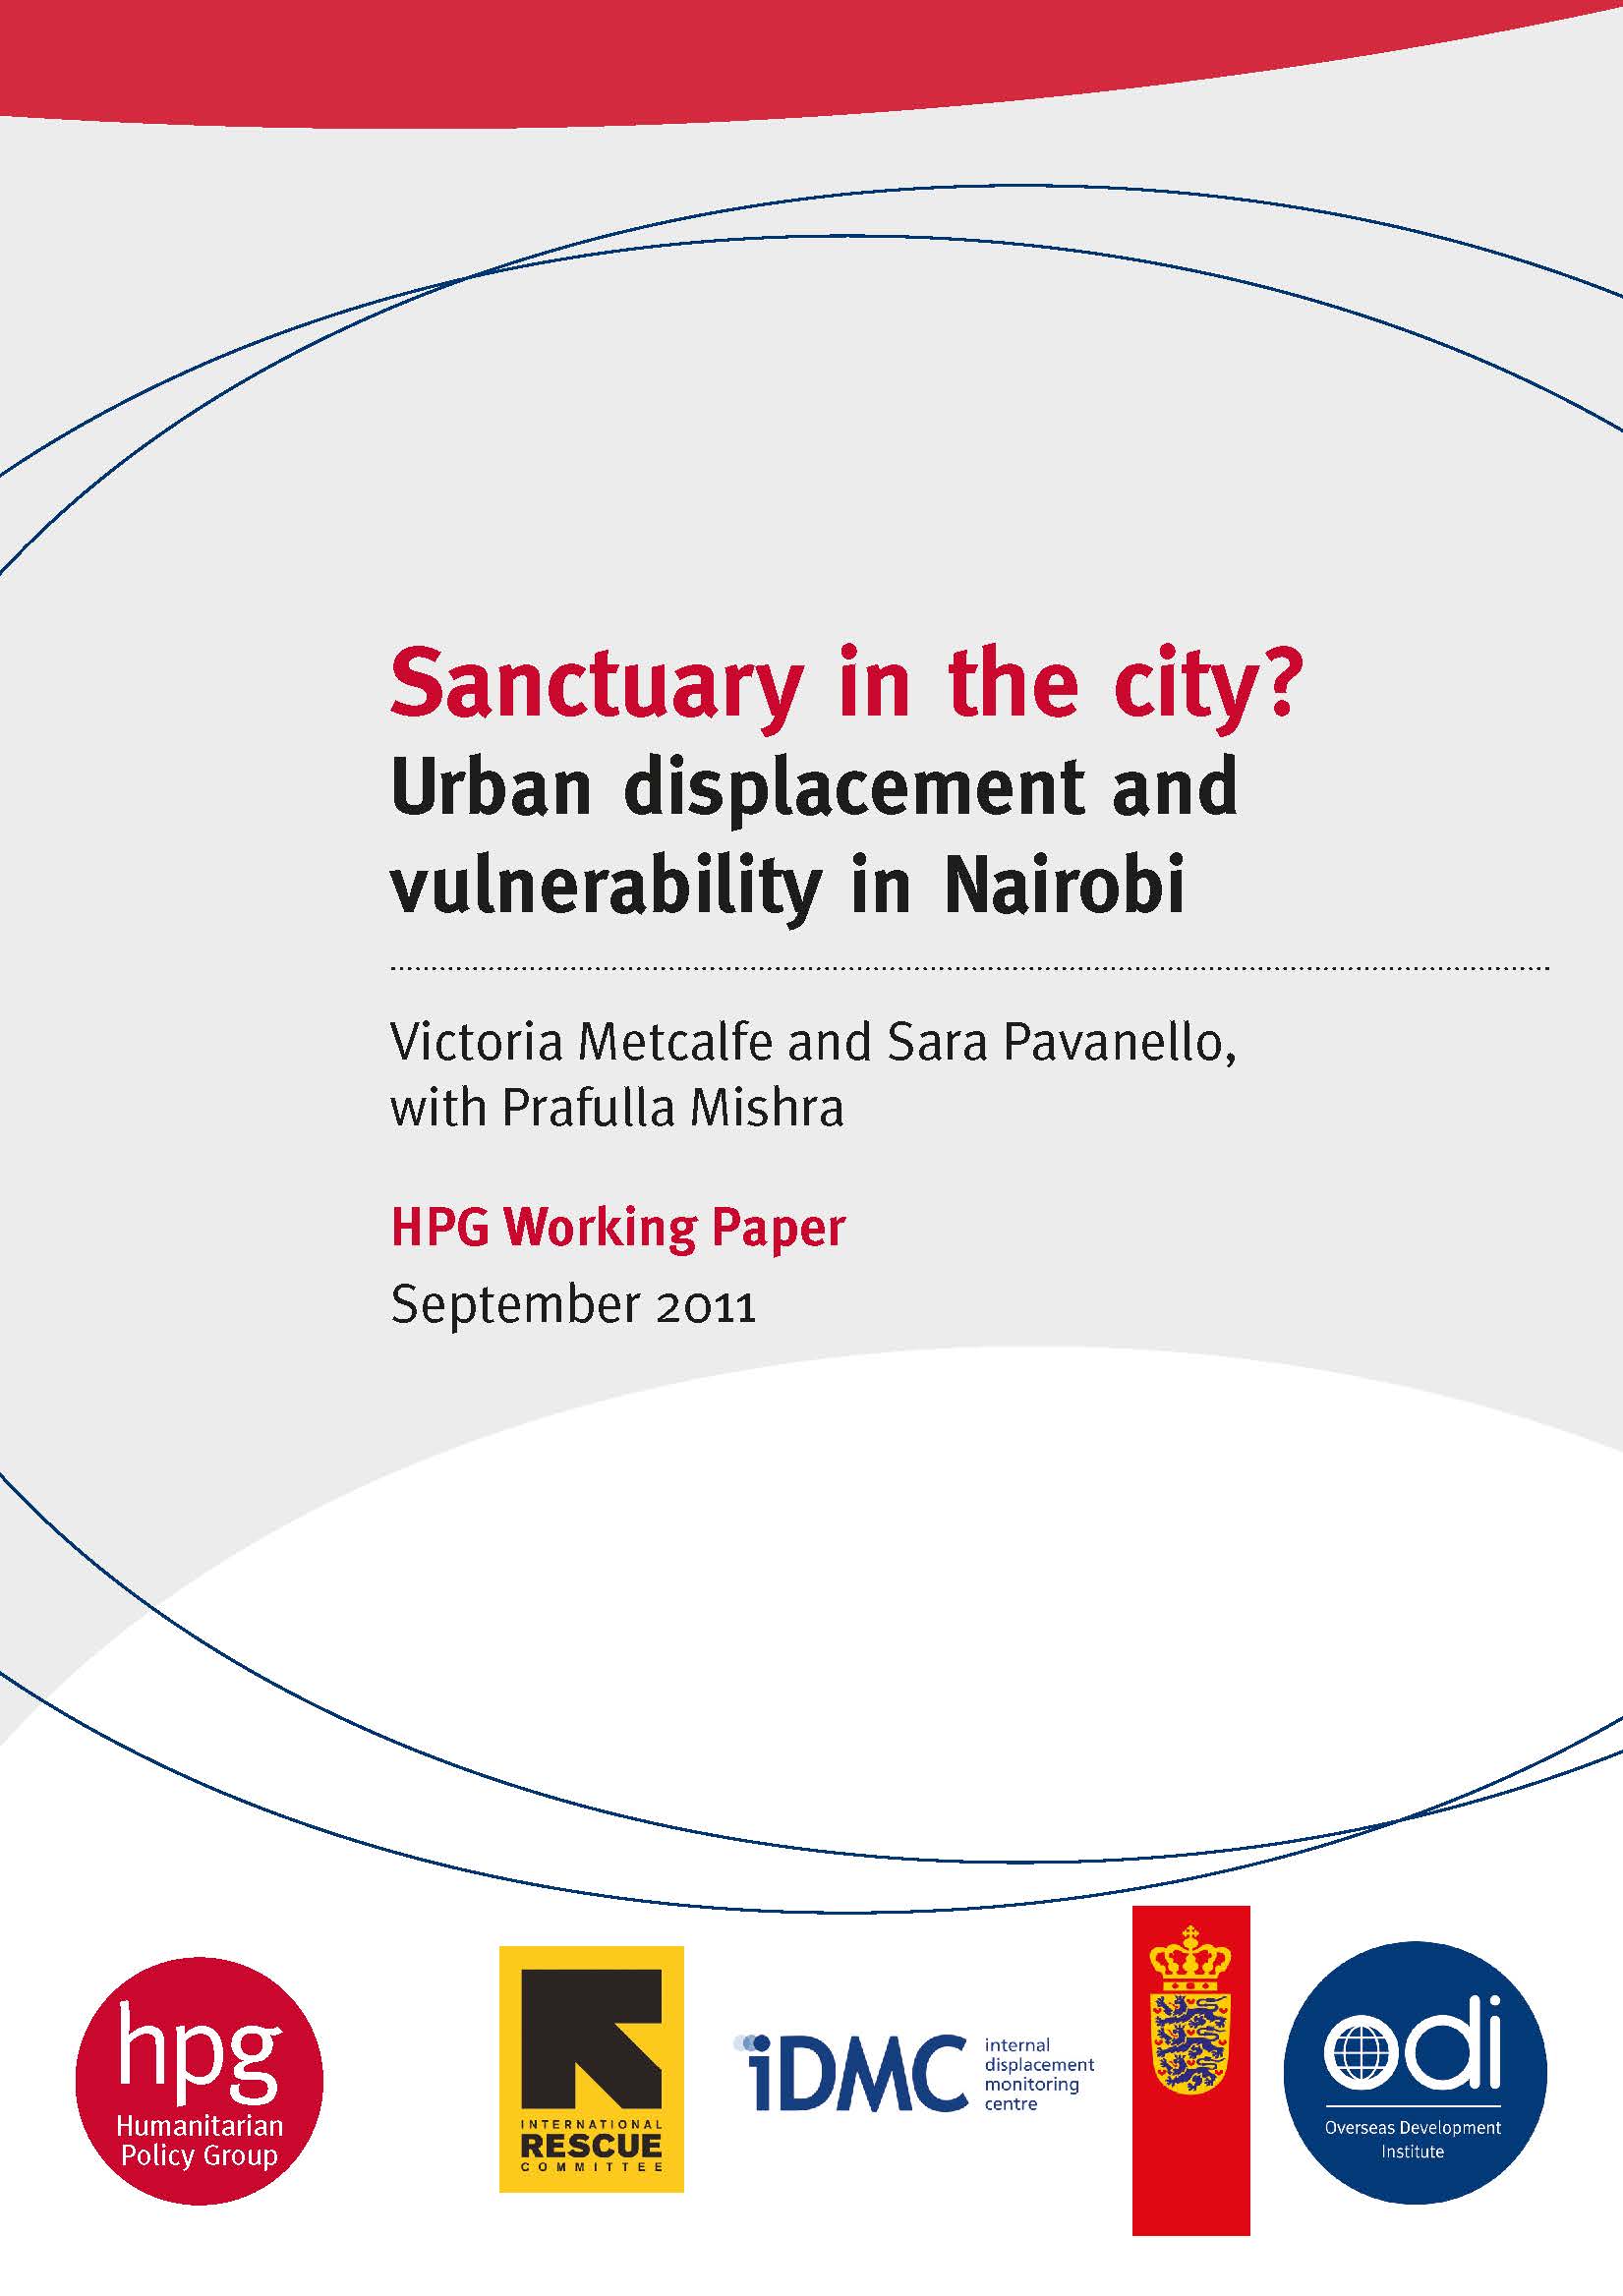 Sanctuary in the city? Urban displacement and vulnerability in Nairobi